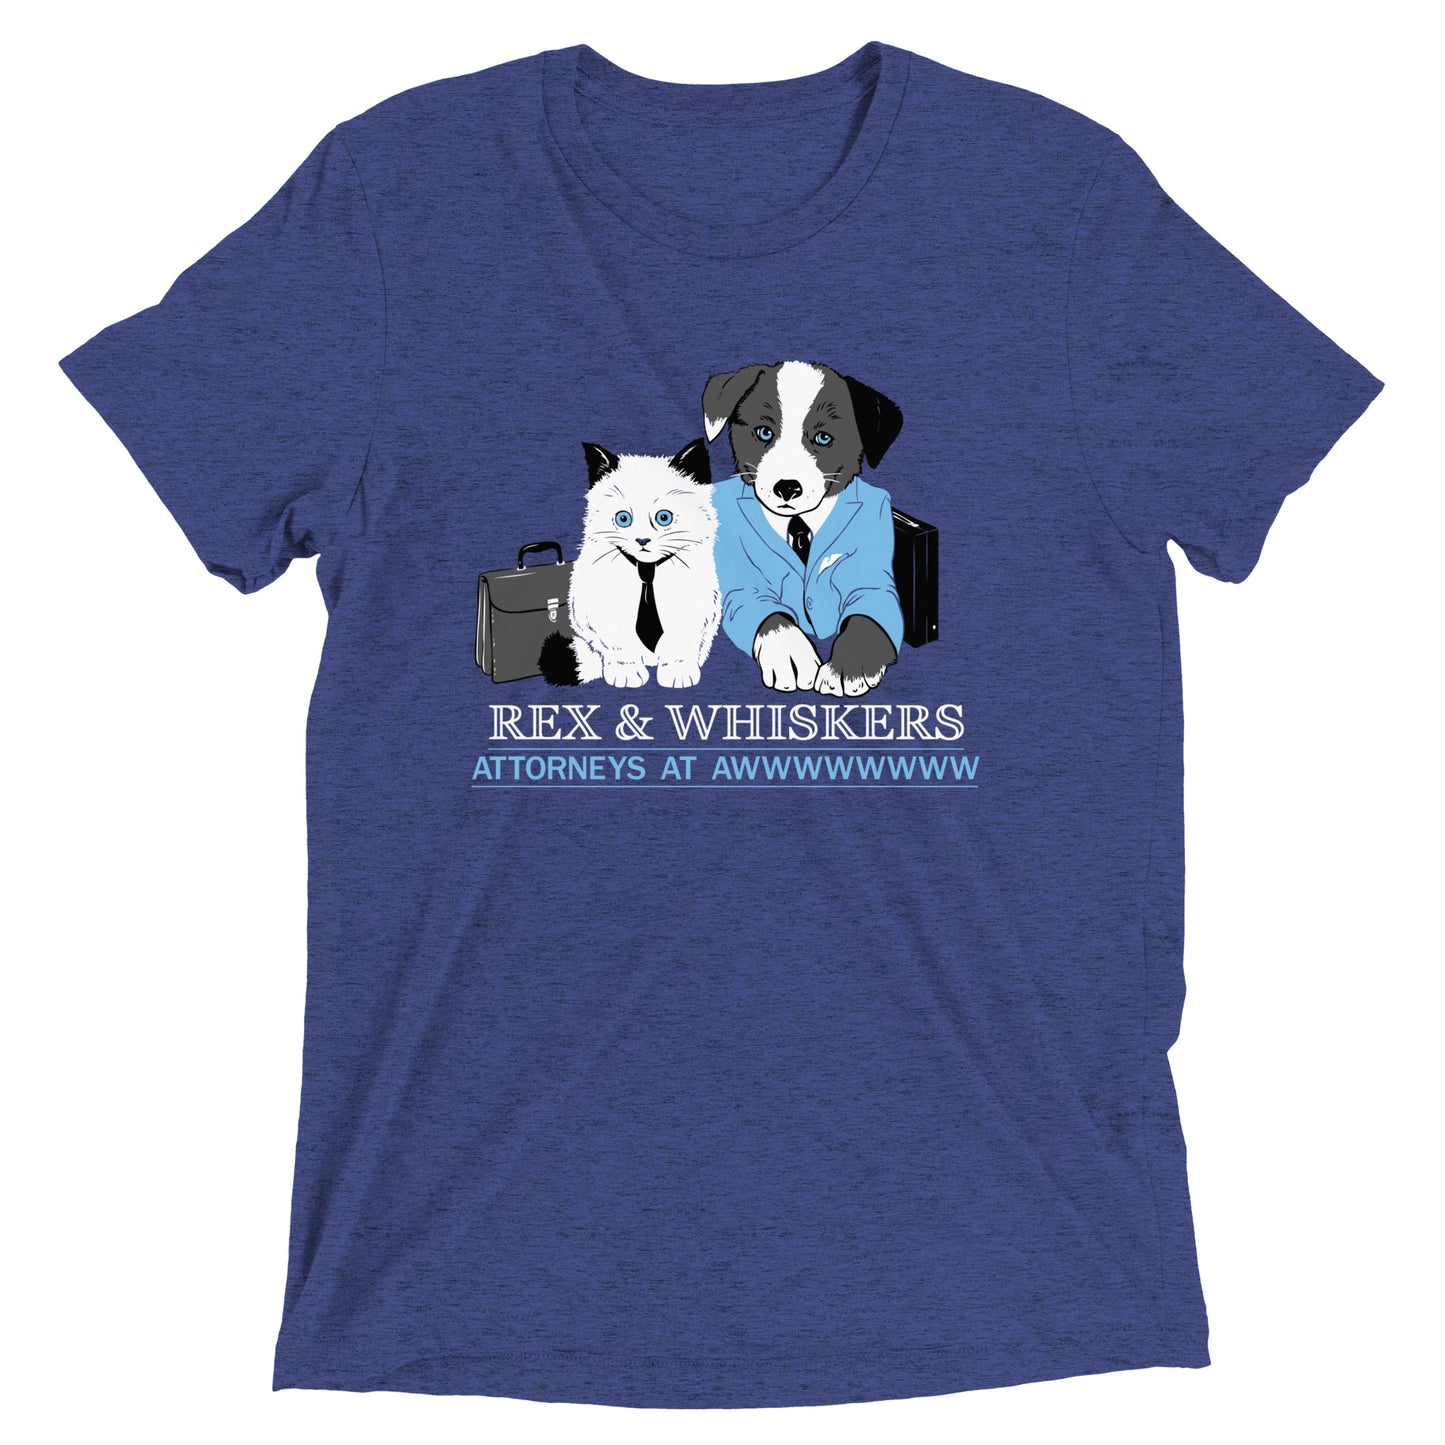 Rex and Whiskers Attorneys Men's Tri-Blend Tee